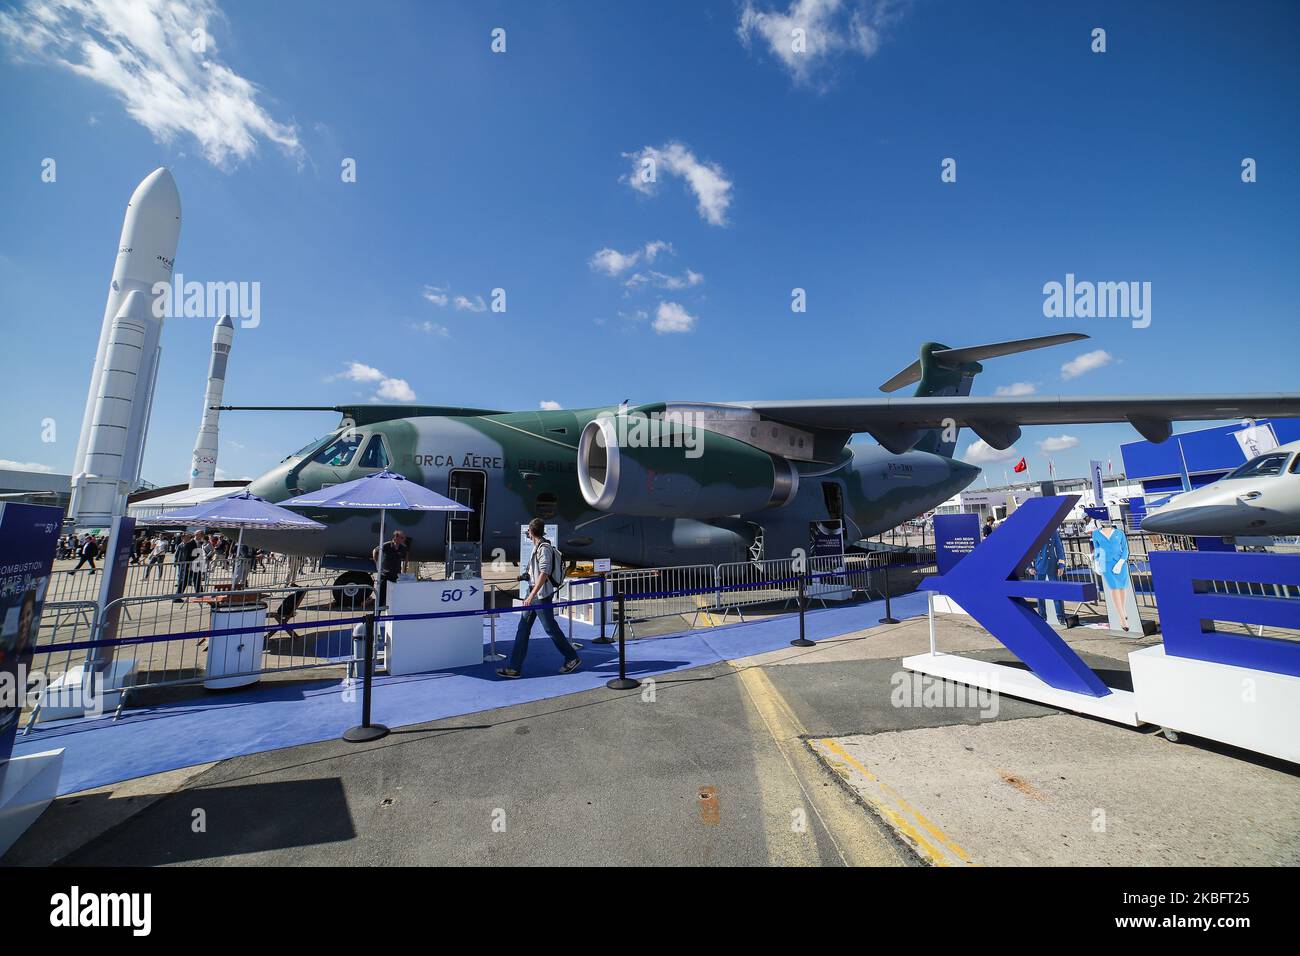 Brazilian Air Force Embraer KC-390 renamed after Boeing and Embraer deal as C-390 Millennium, the made in Brazil medium sized transport aircraft as seen on 53rd Paris Air Show Le Bourget in France on June 21, 2019. It is made by Brazilian aerospace manufacturer Embraer Defense and Security with its first flight on February 3, 2019. The military multipurpose airplane for cargo, aerialrefueling and troops can carry 26 tonnes in its fuselage and the 2x IAE V2500 jet engines. The aircraft registration is PT-ZNX and belongs to Força Aérea Brasileira fleet. Brazil and Portuguese Air Force of Portuga Stock Photo